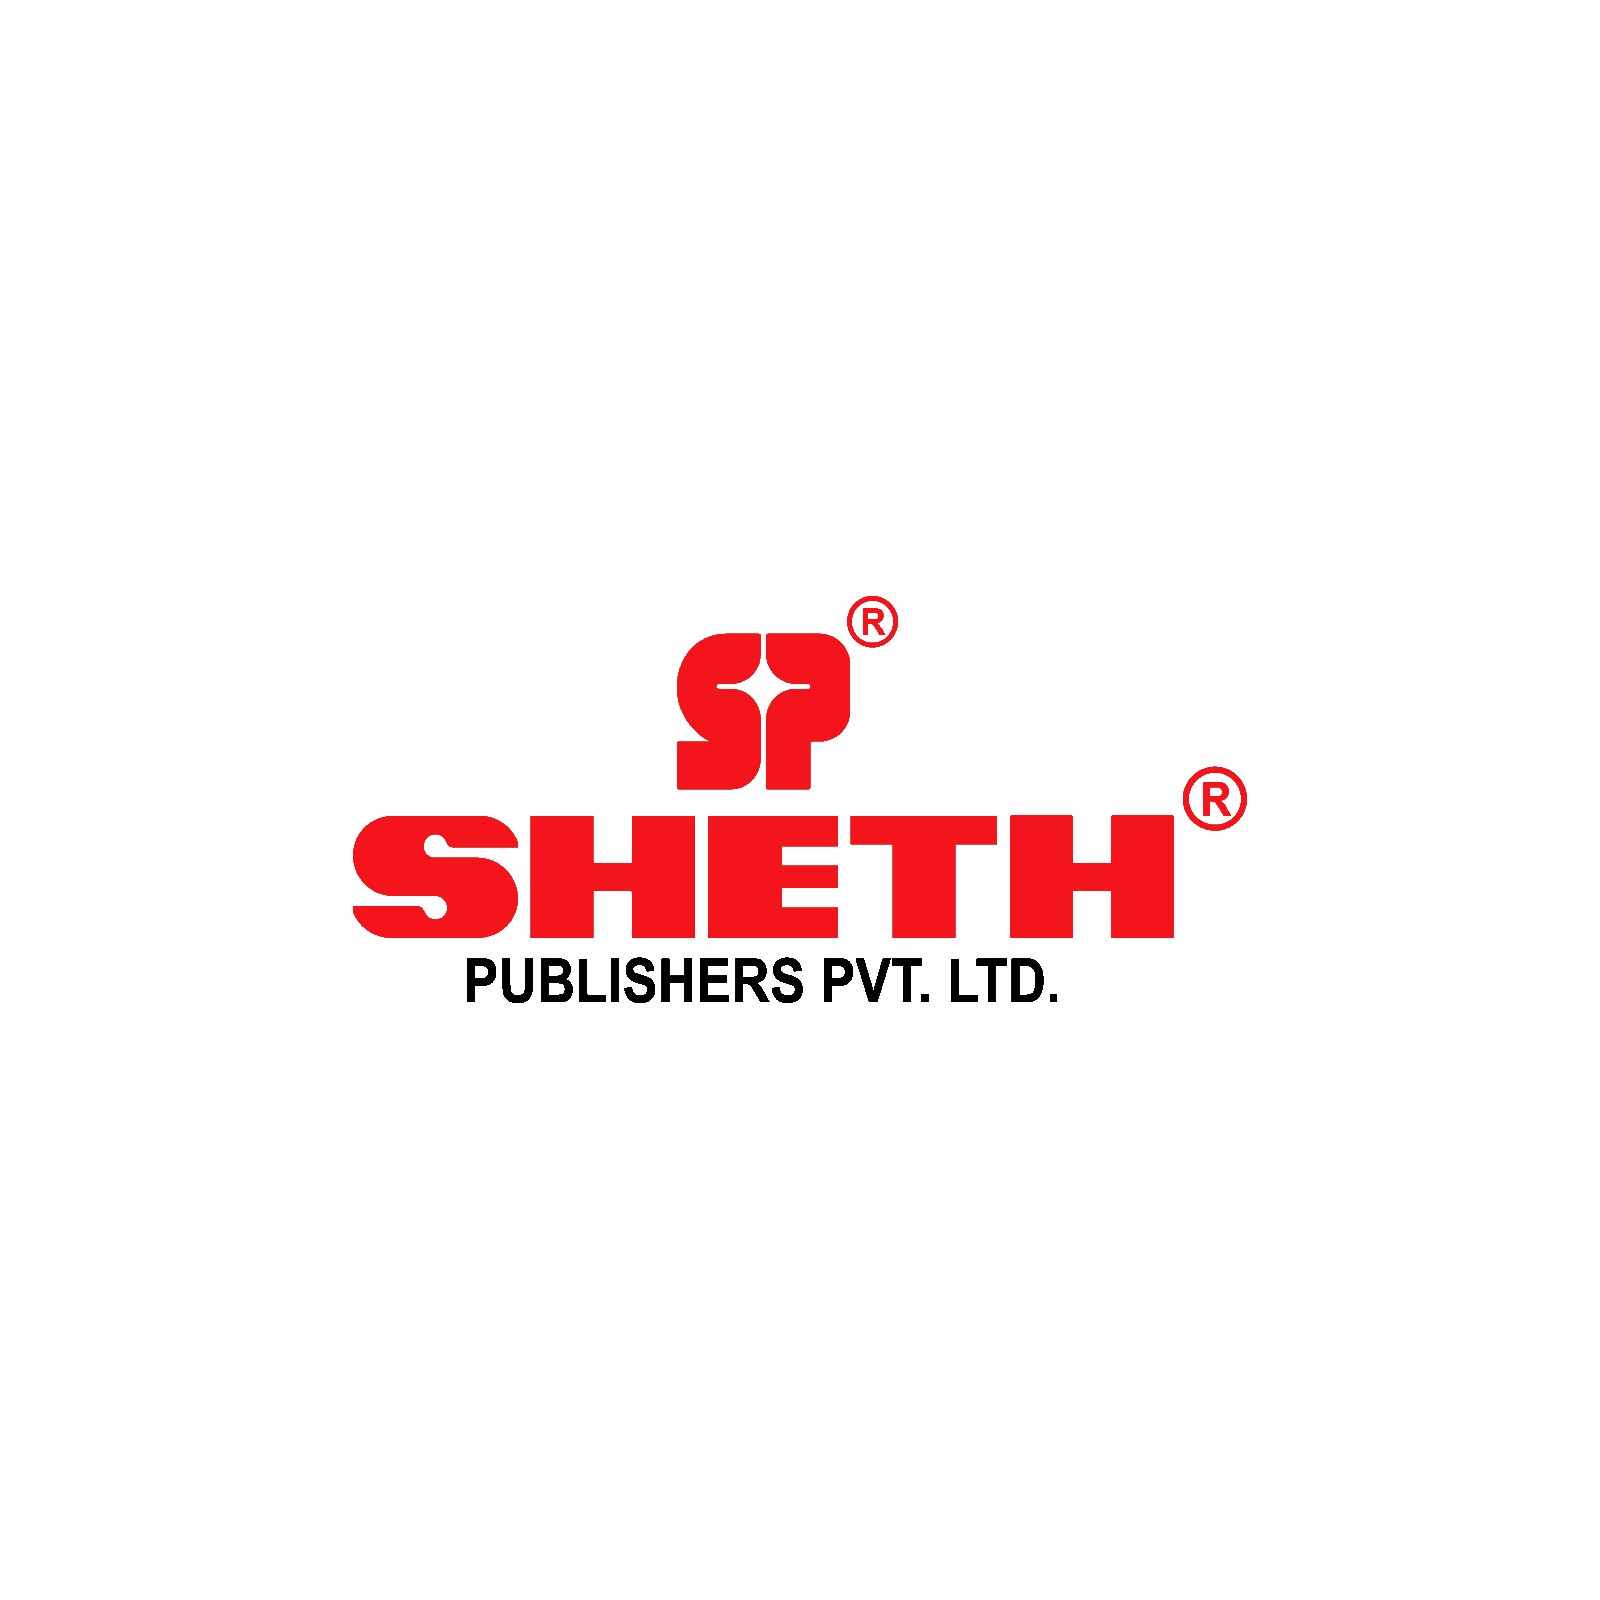 The largest textbook Publishing Brand in India!